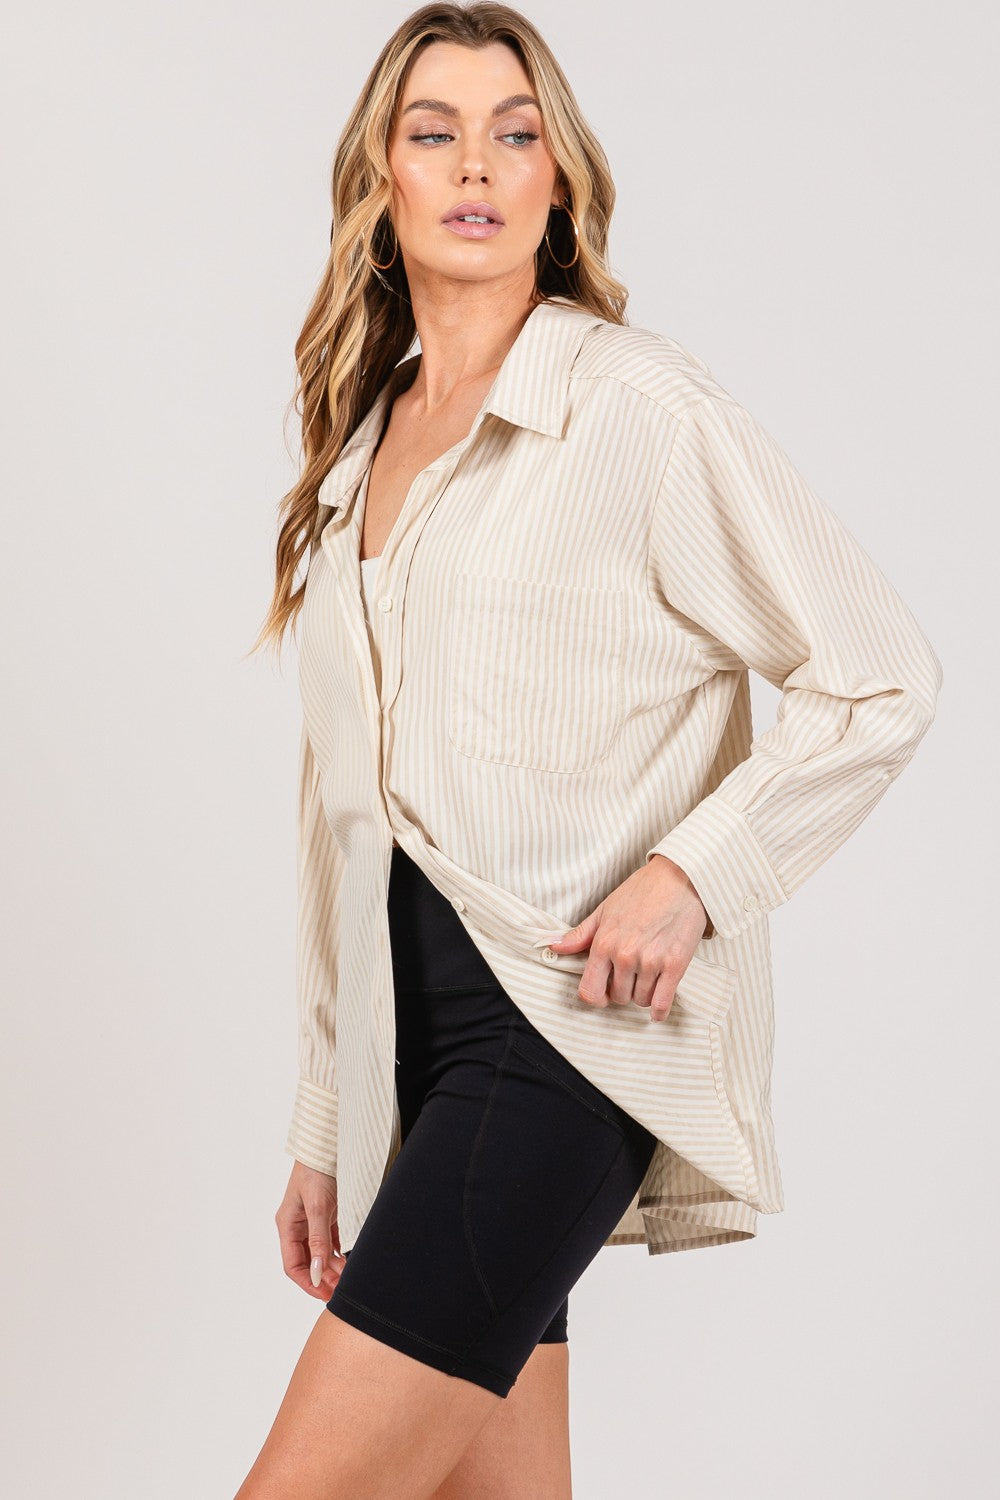 Striped Button Up Long Sleeve Shirt for Women in Taupe | Shirts | Ro + Ivy